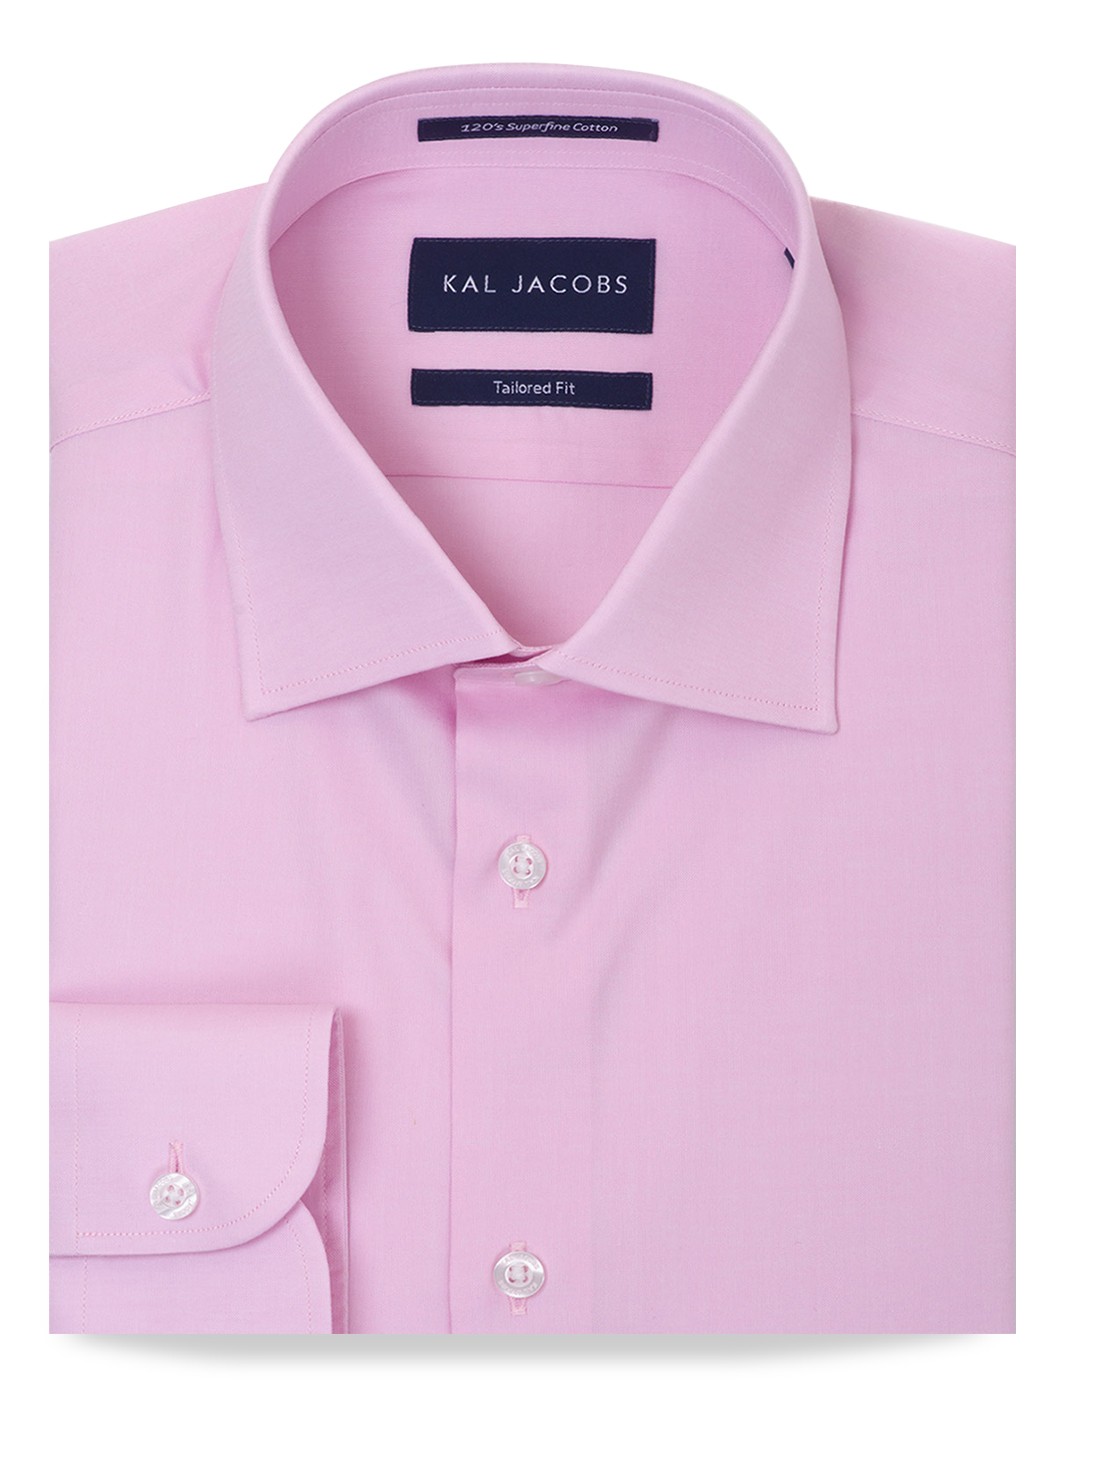 Tailored Fit Pink Pinpoint Oxford 120s Cotton Shirt - Kal Jacobs